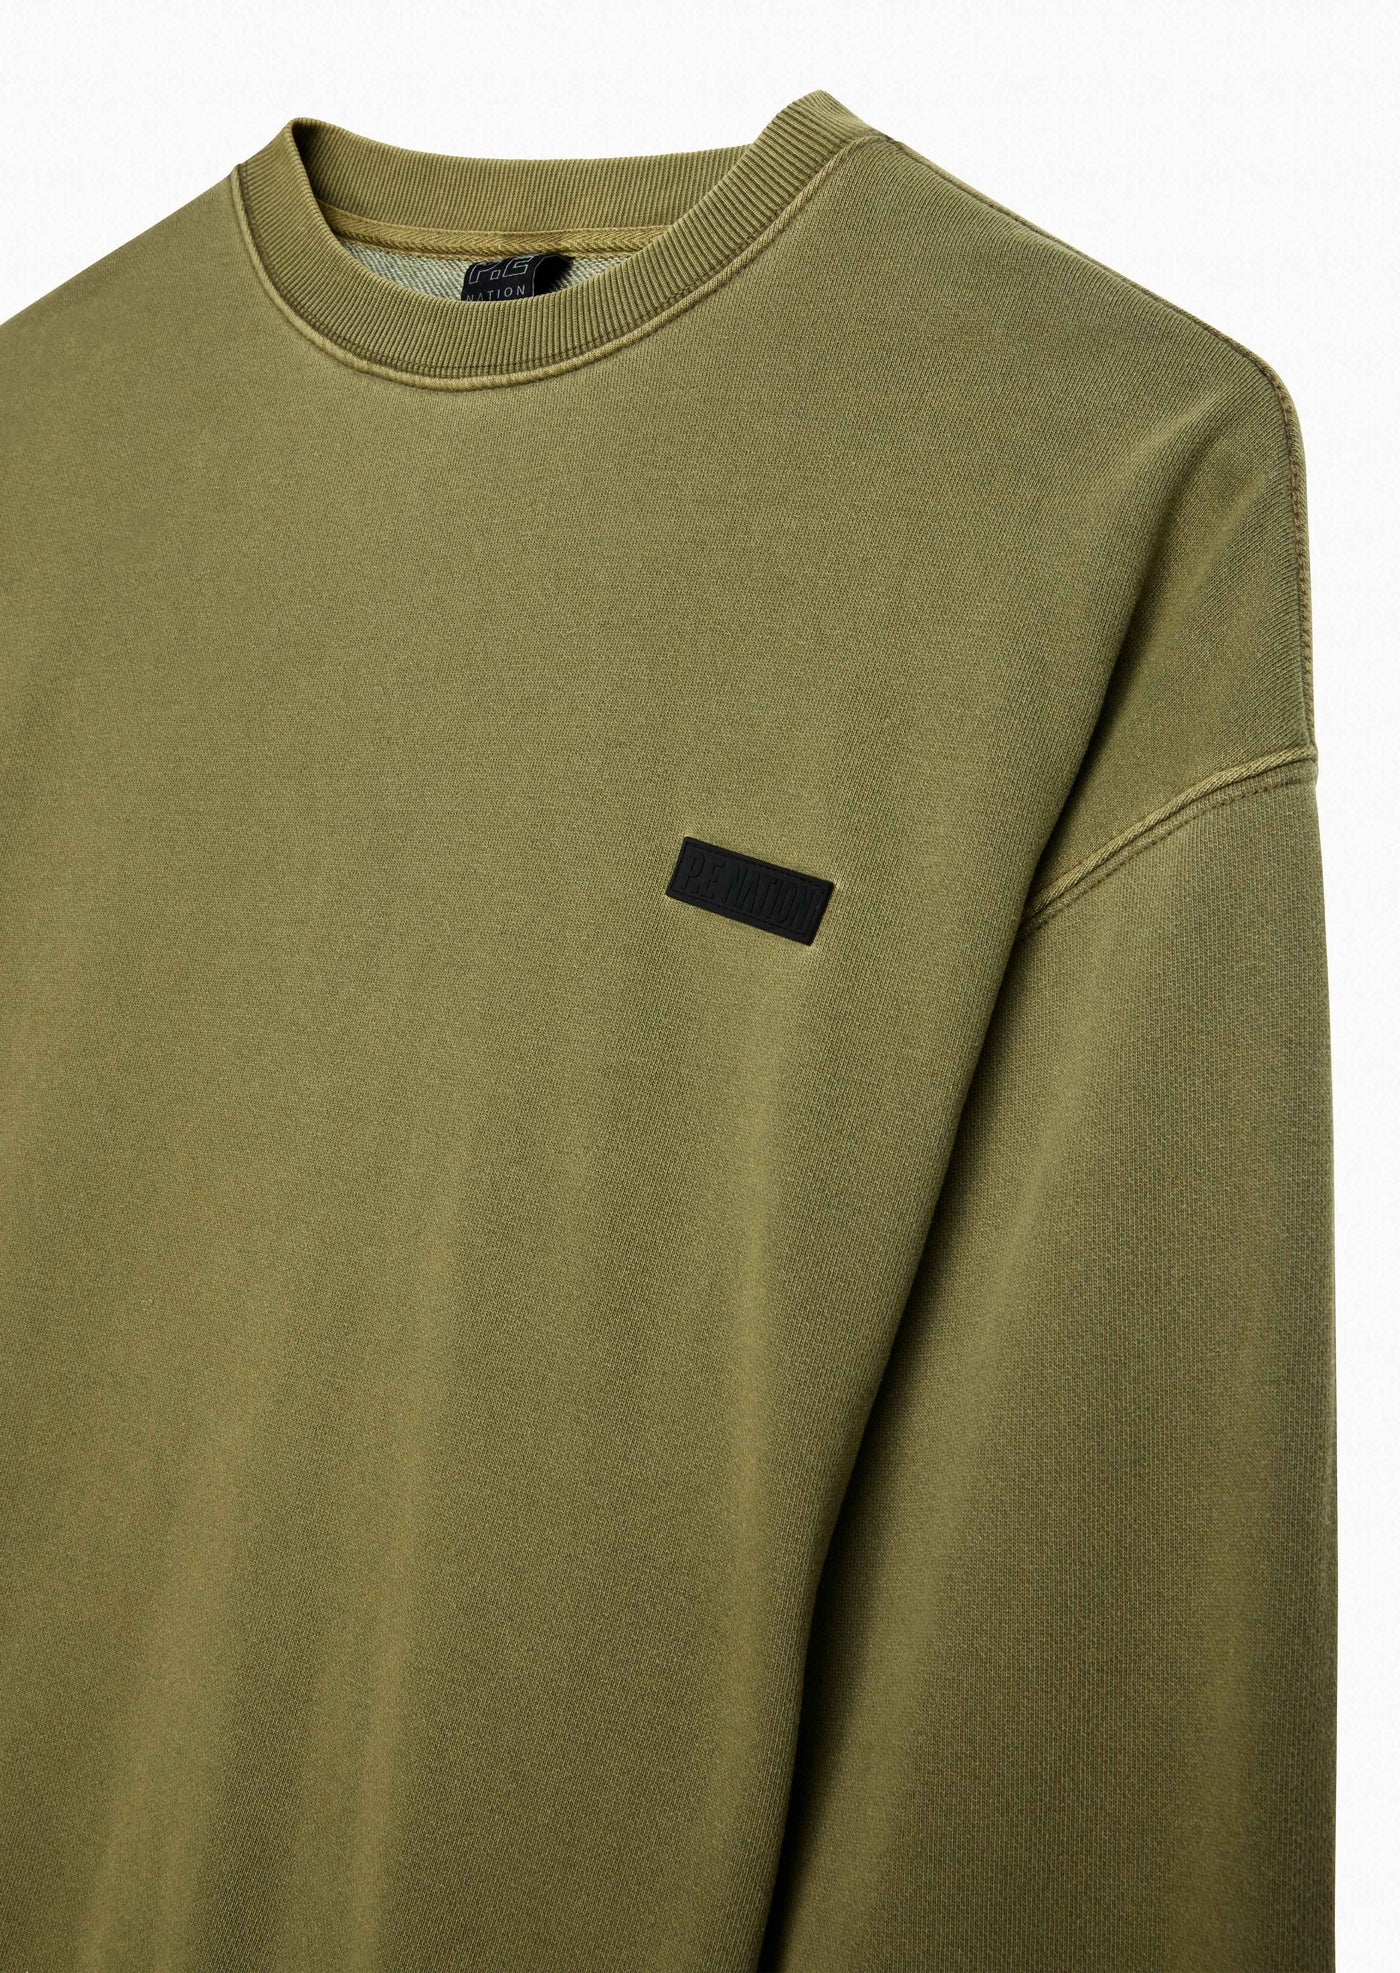 KICKOUT WASHED SWEAT IN OLIVE